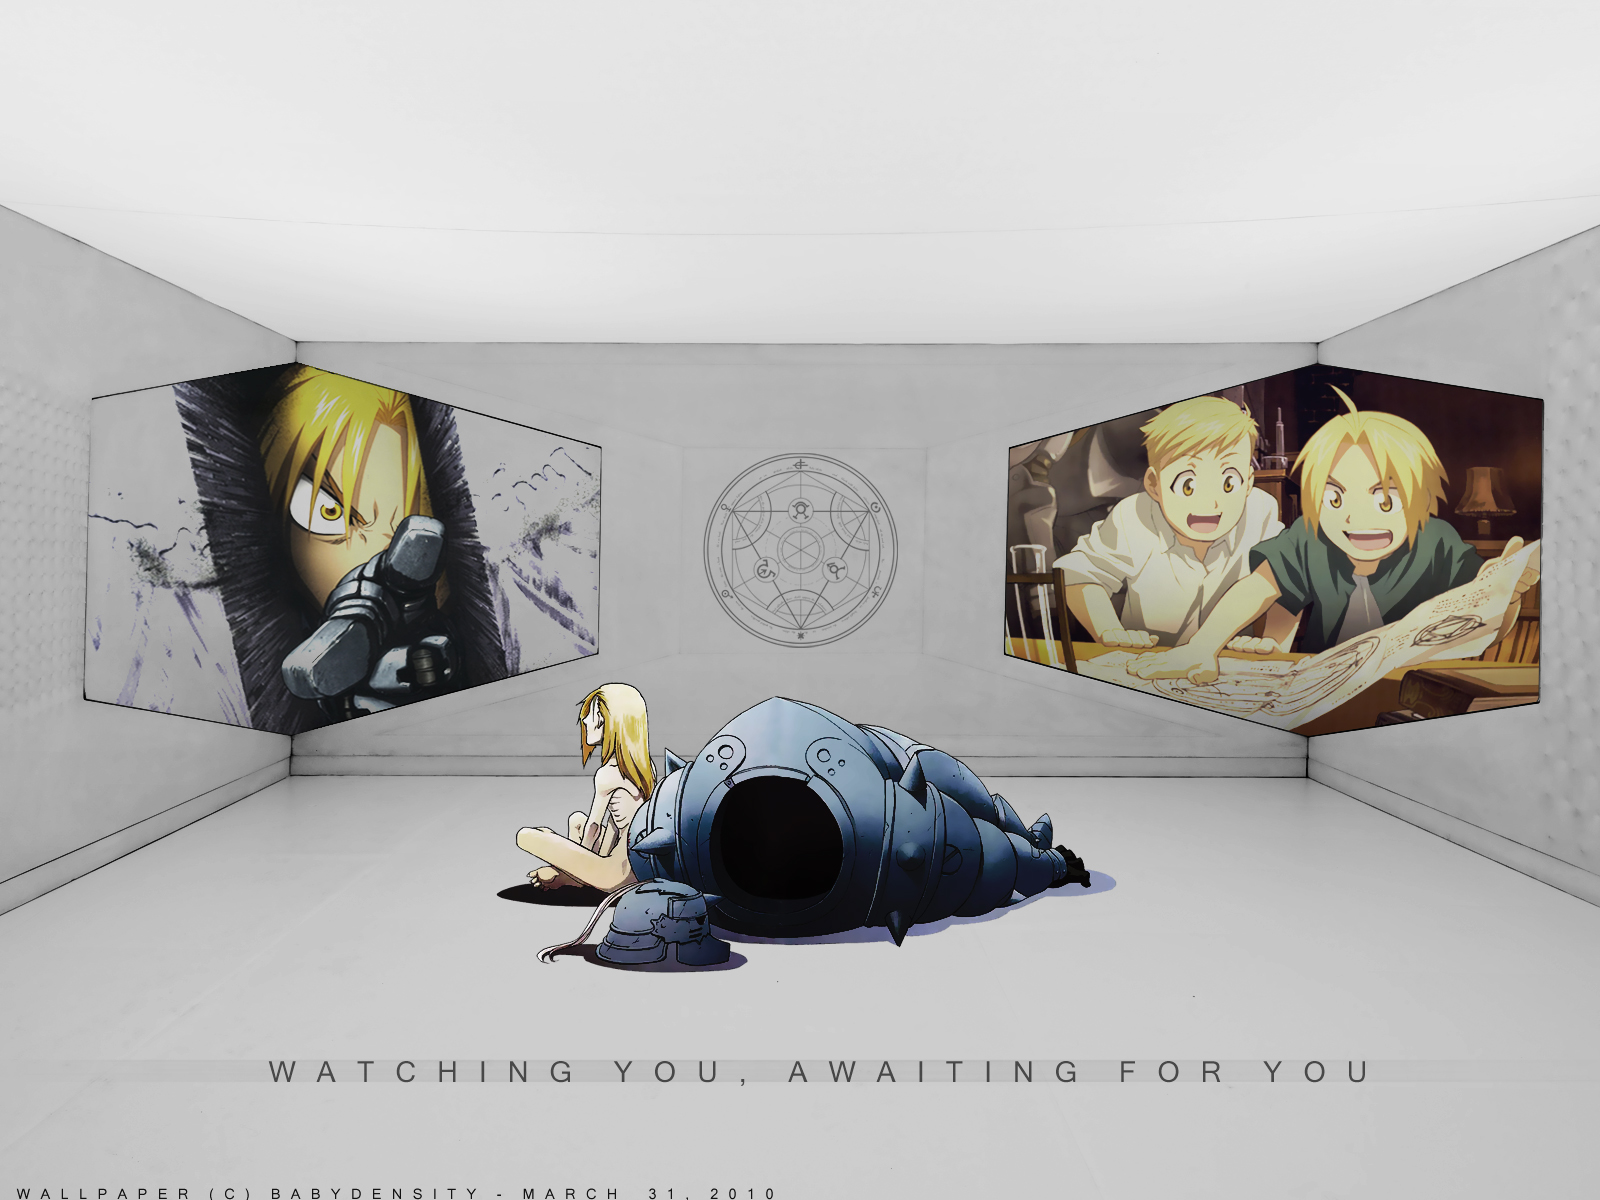 Anime characters Edward and Alphonse Elric from FullMetal Alchemist in a desktop wallpaper.